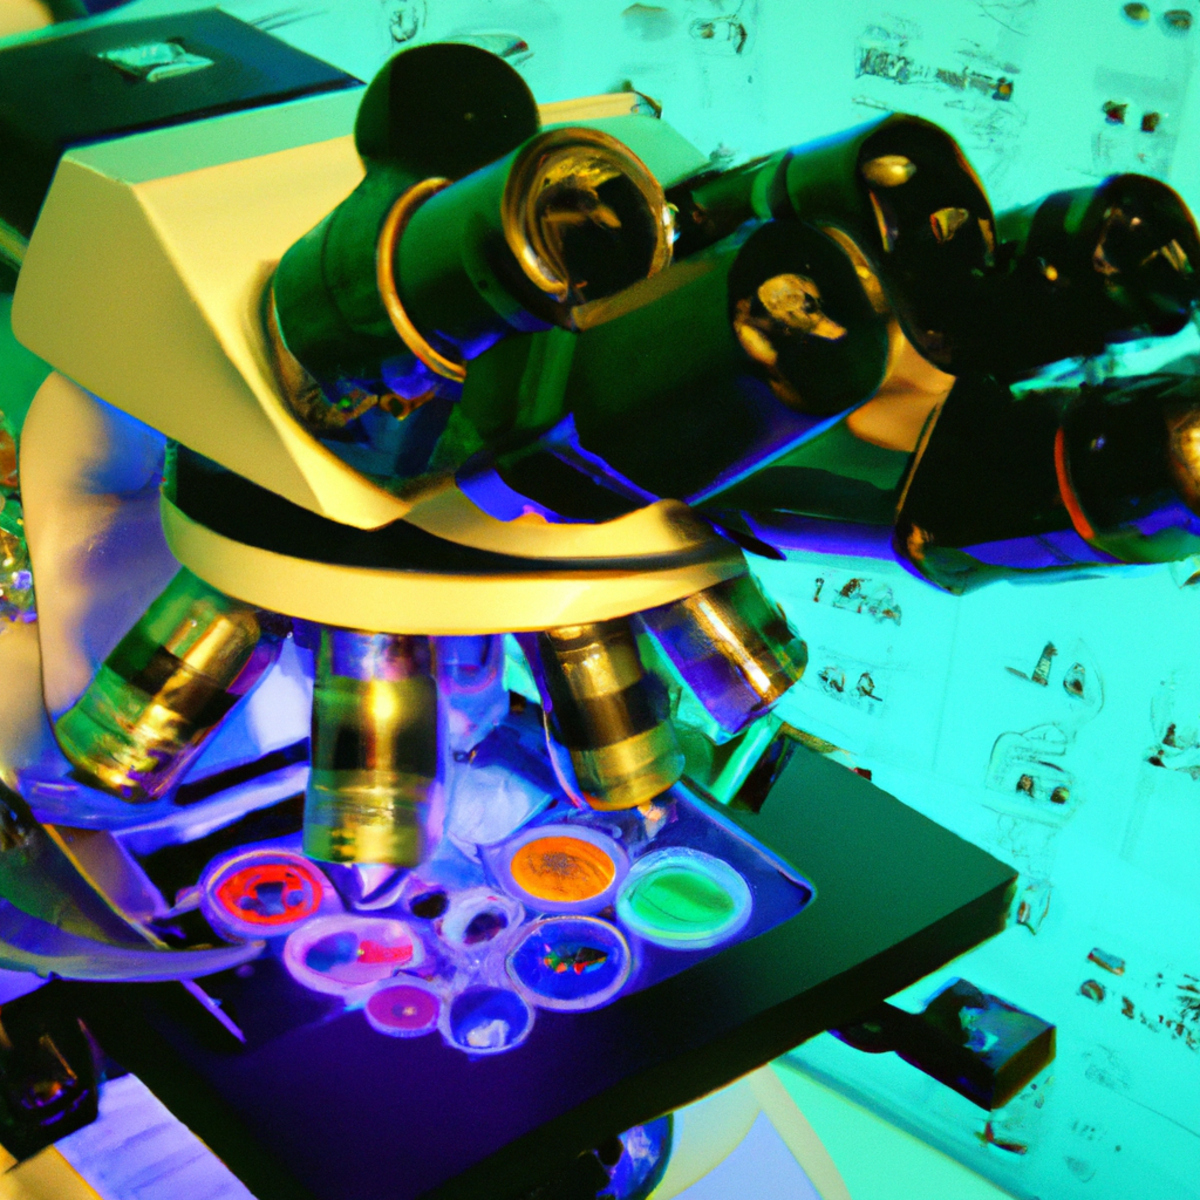 Microscope examines vibrant genetic samples on a glass slide, while a computer screen displays intricate sequencing analysis-Kabuki Syndrome